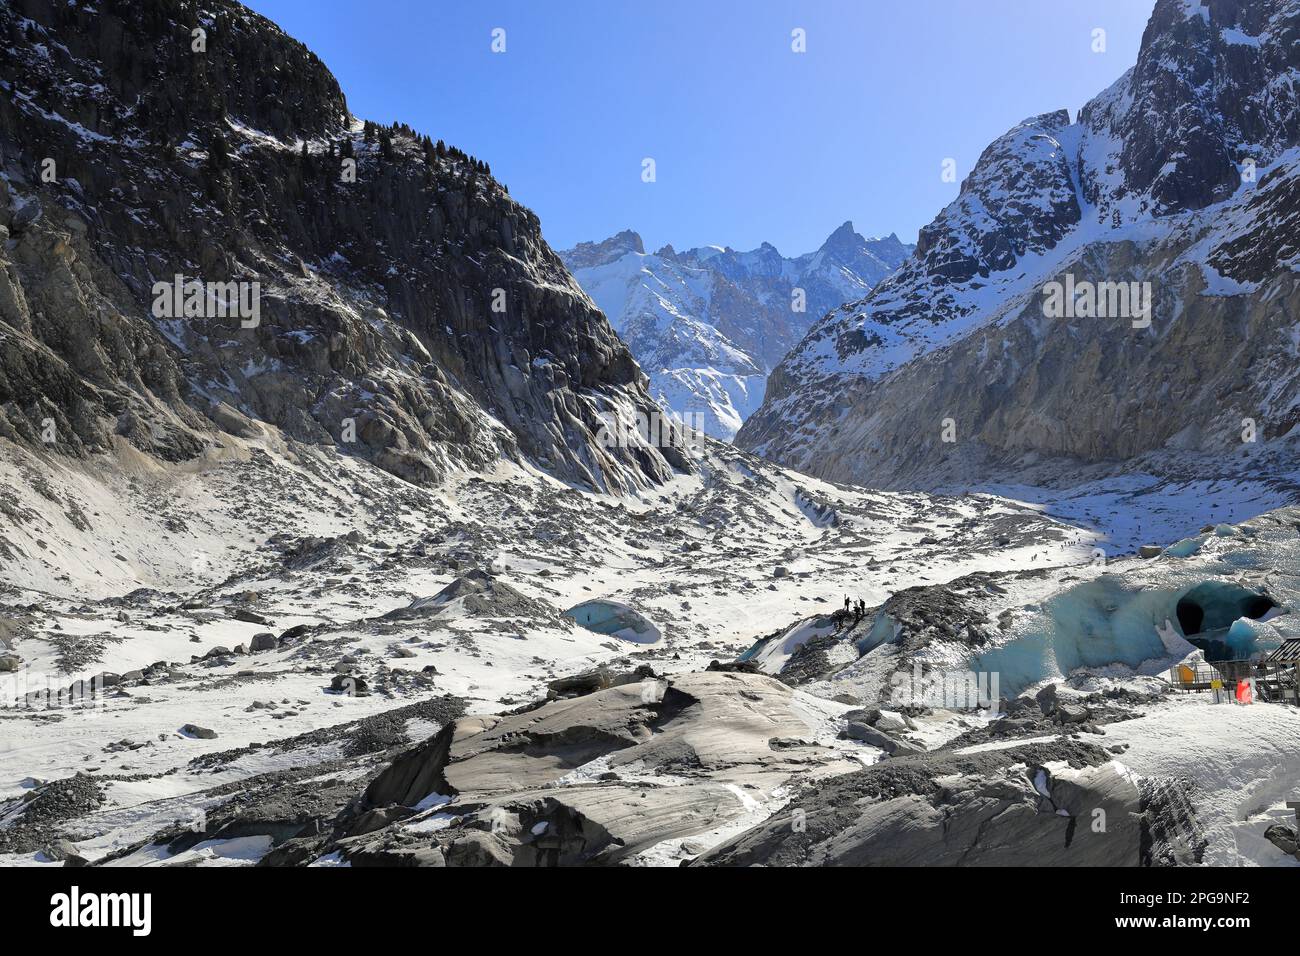 The Mer de Glace ('Sea of Ice') is a valley glacier. Mont Blanc massif, in the French Alps. Europe. Stock Photo